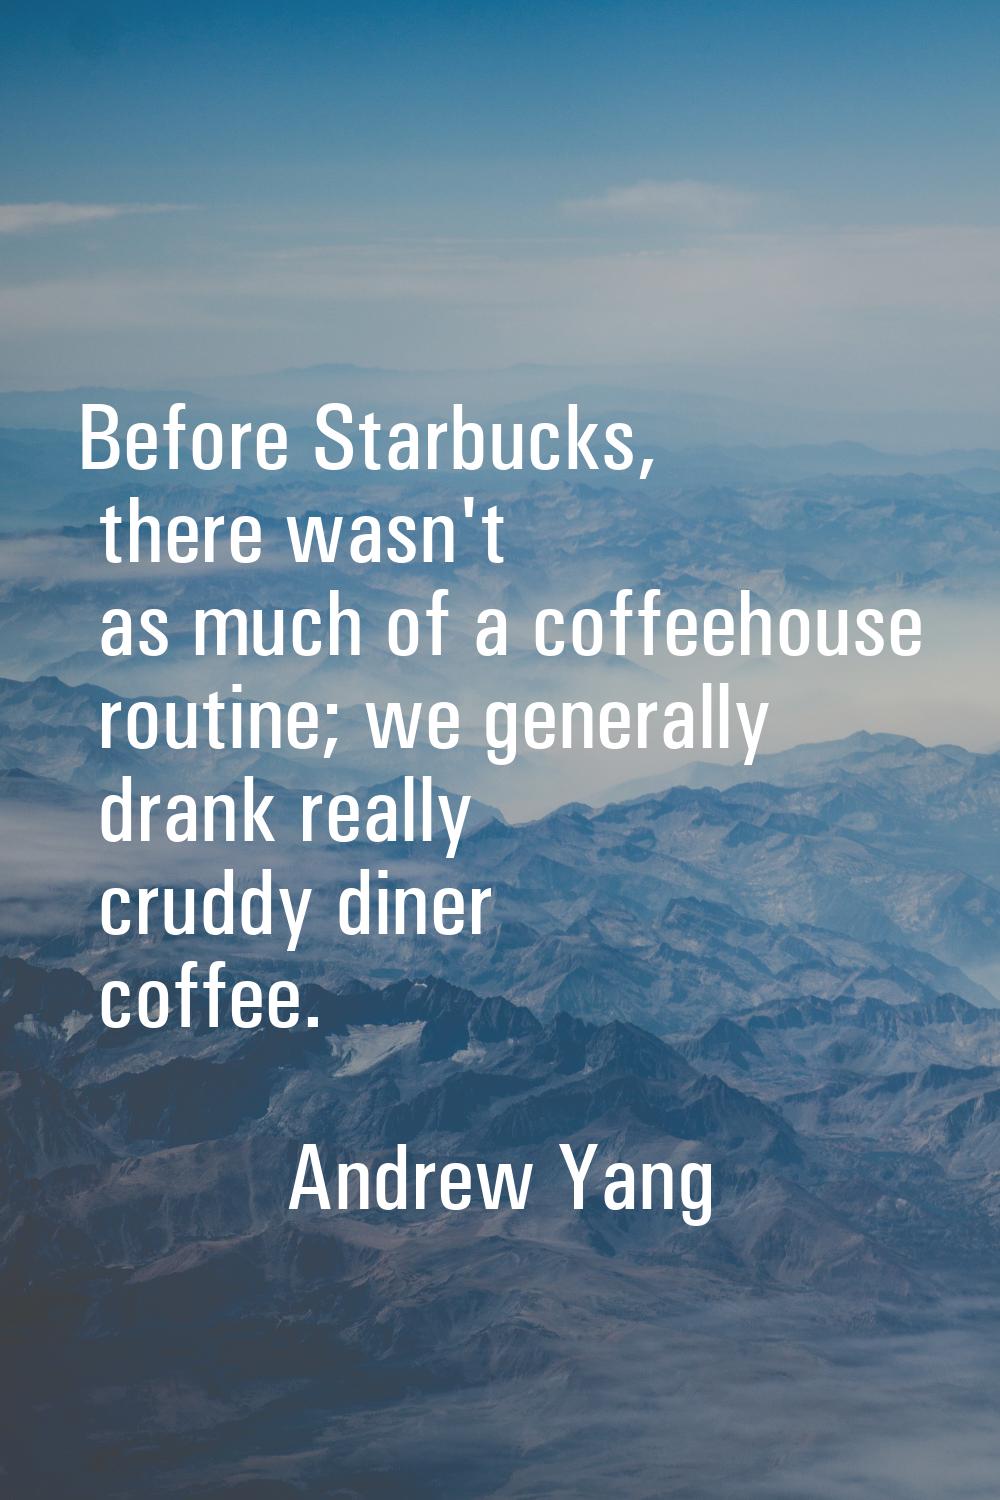 Before Starbucks, there wasn't as much of a coffeehouse routine; we generally drank really cruddy d